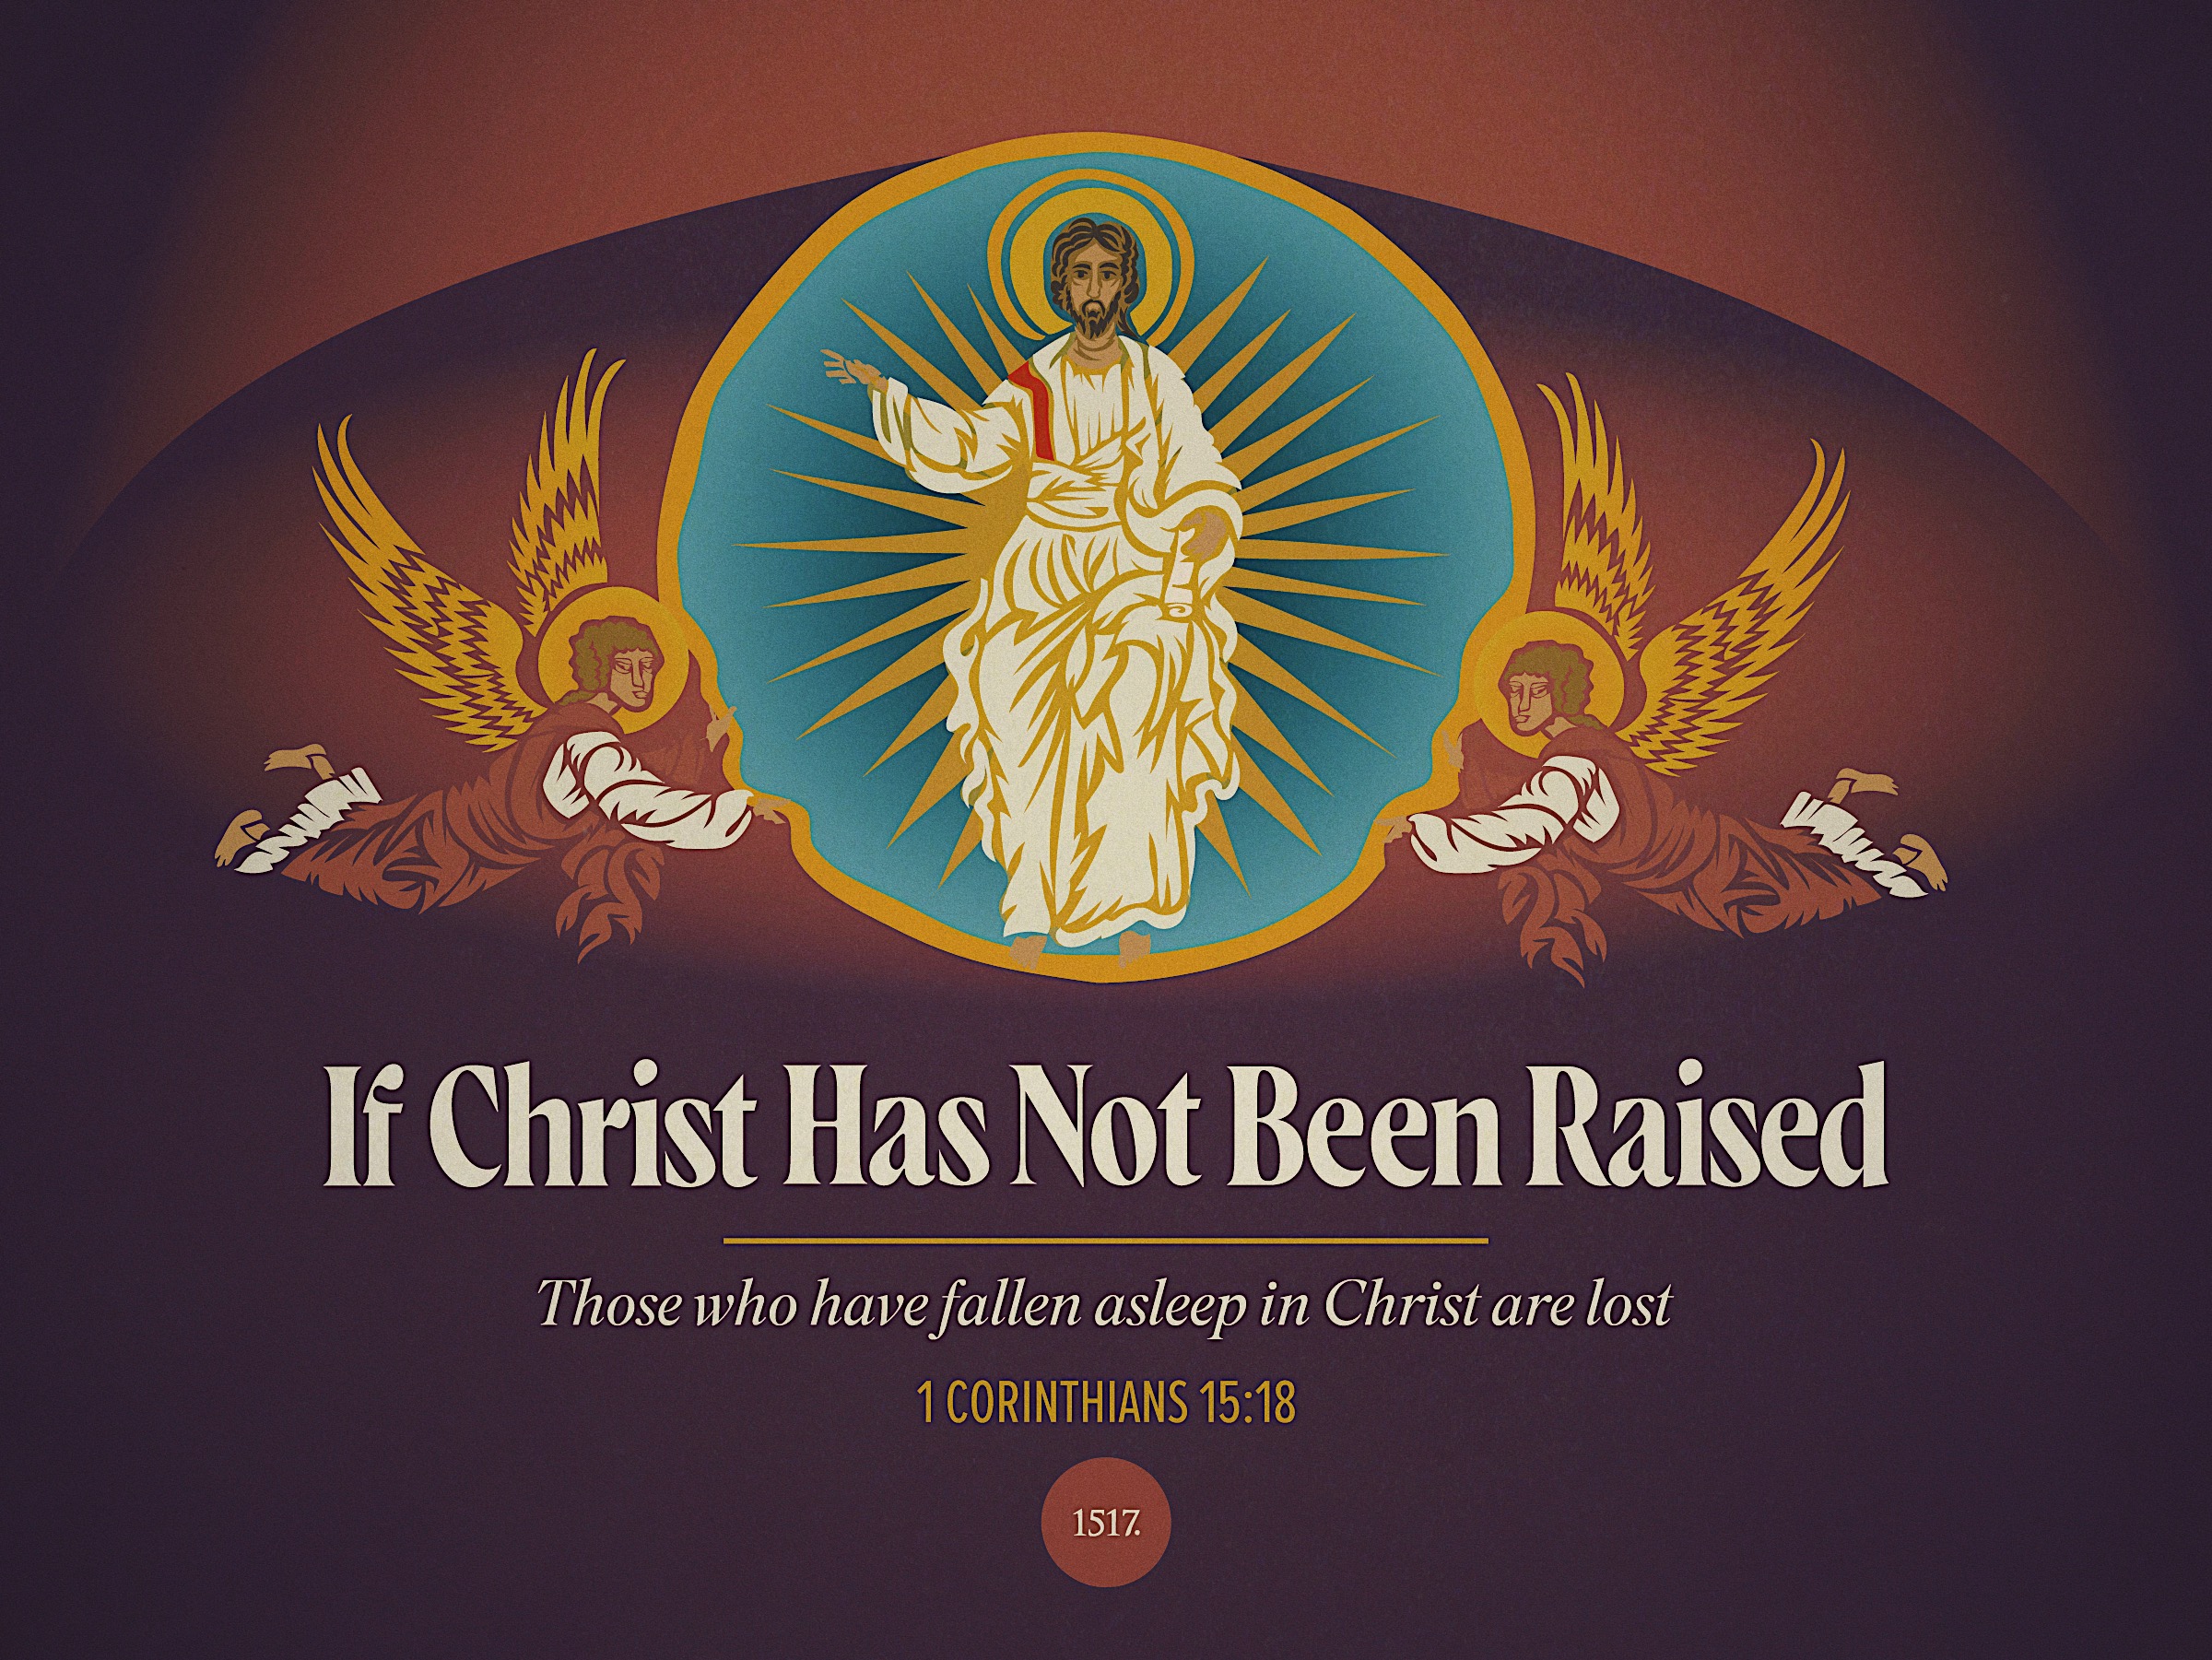 If Christ has not been raised, the Dead in Christ are Lost